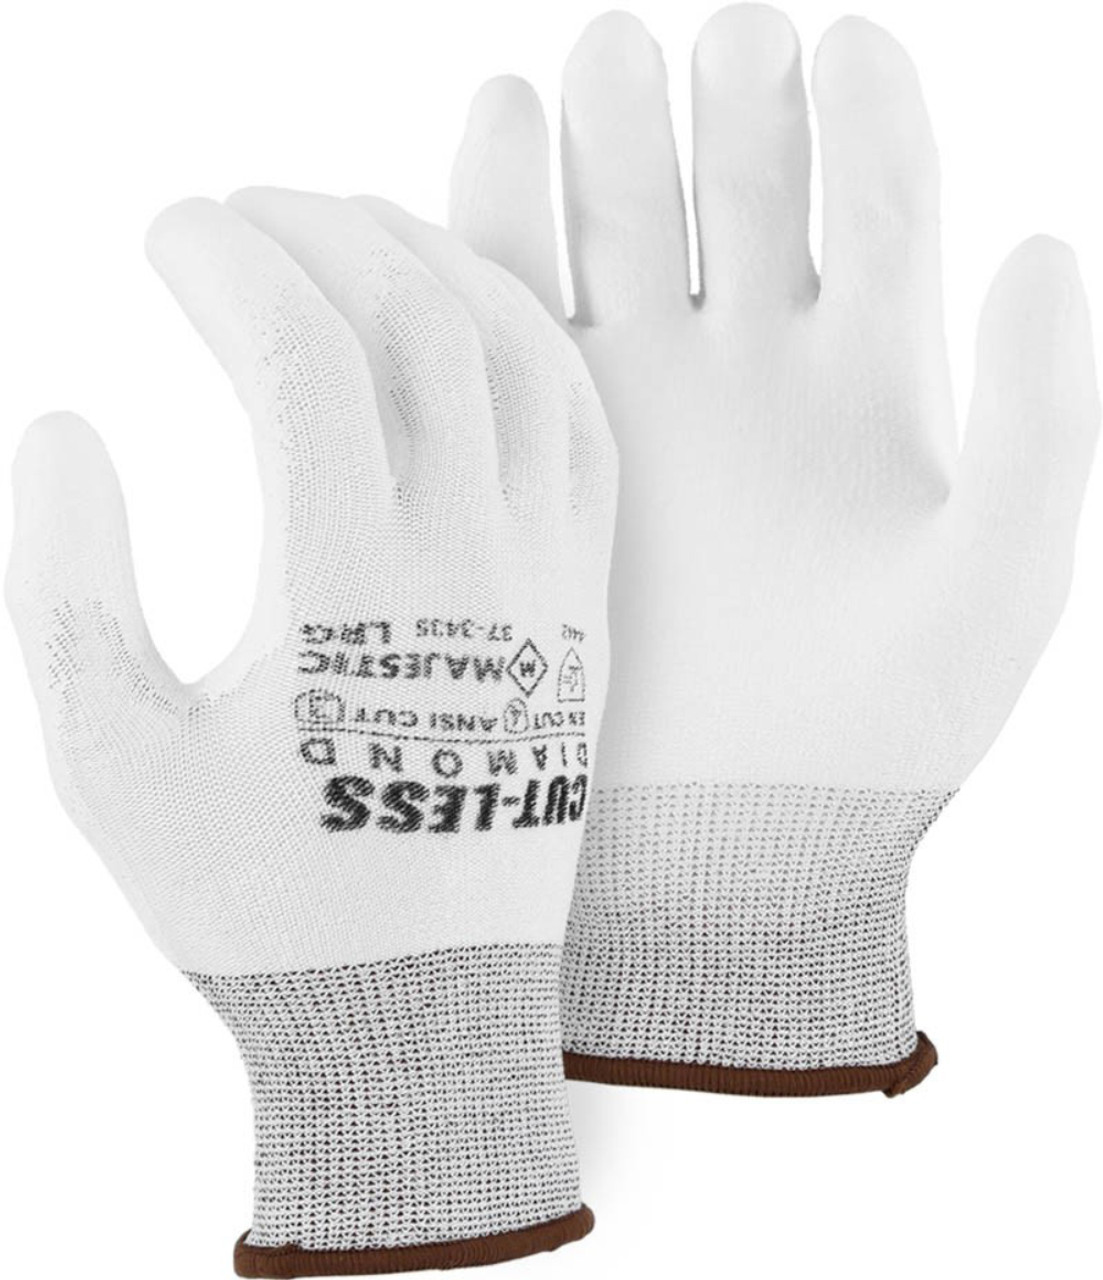 All About Cut Resistant 5/A3/C PU Coated Gloves For Better Hand